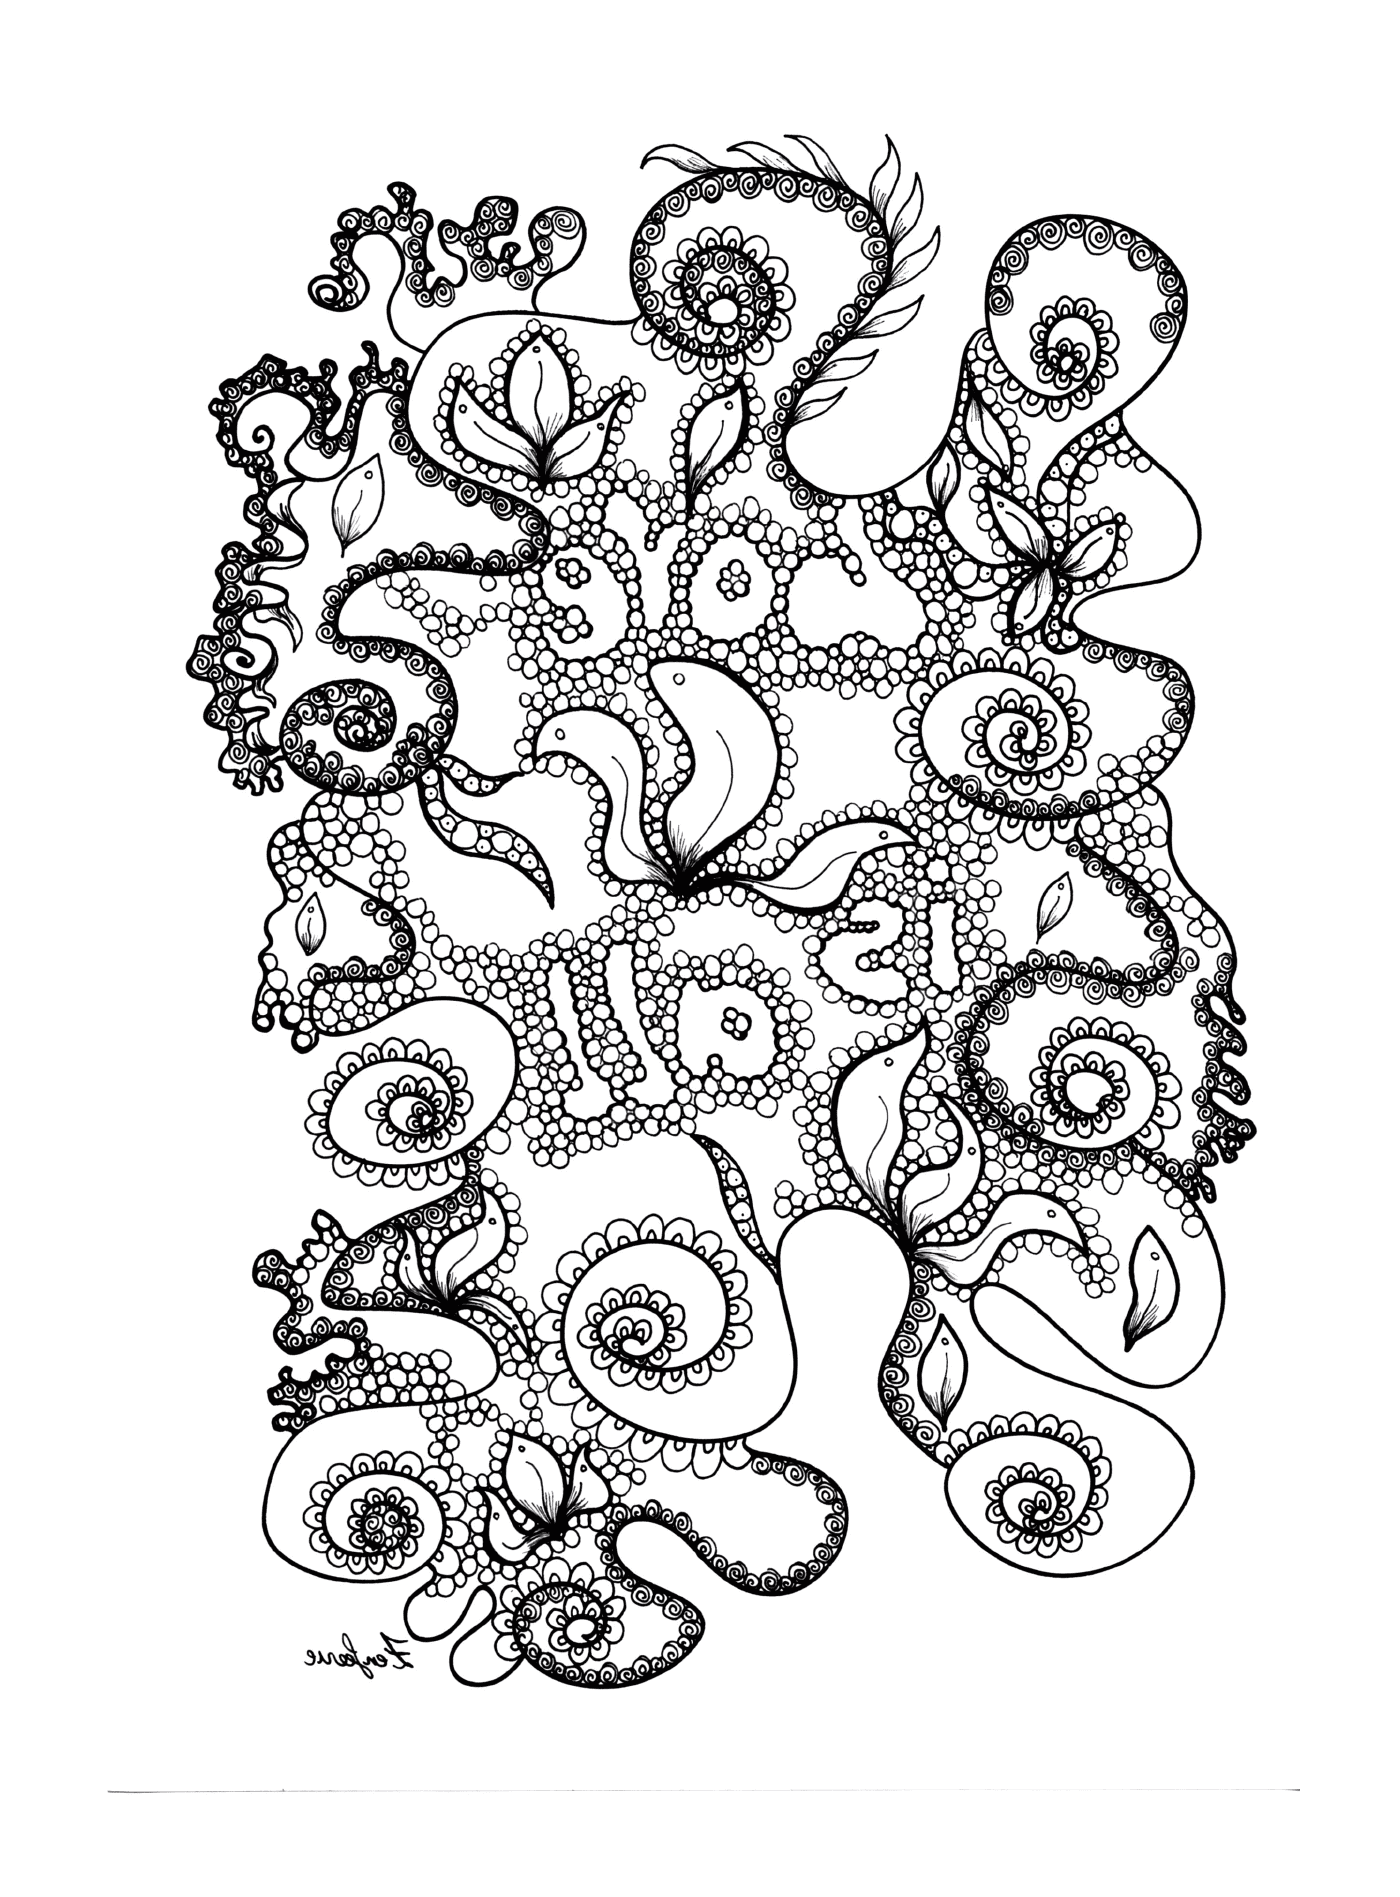  Marine creature with tentacles 